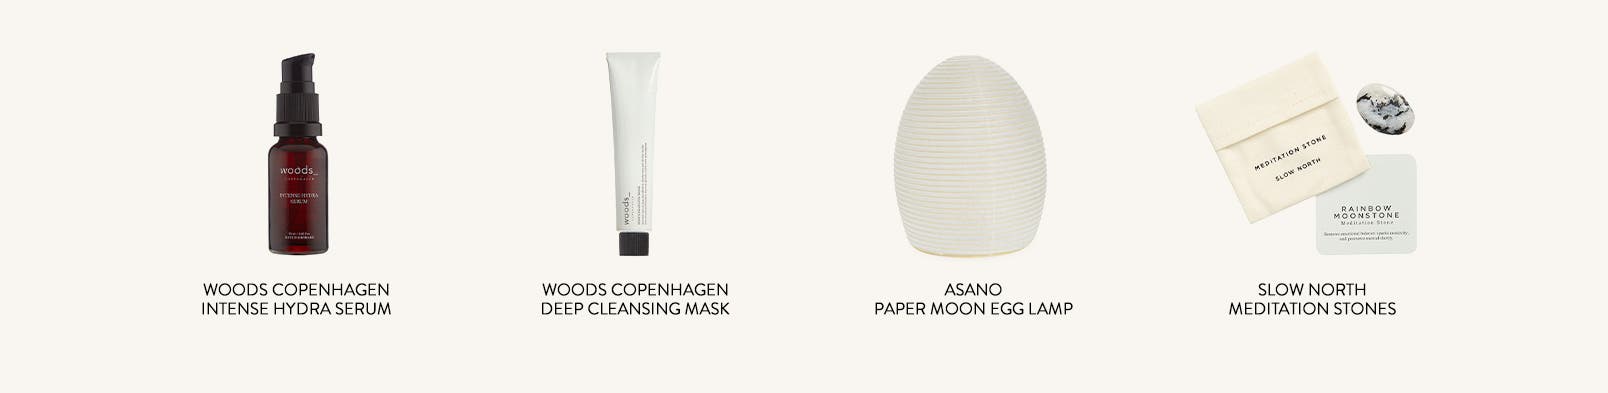 A serum, cleansing mask, egg-shaped lamp and meditation stones.